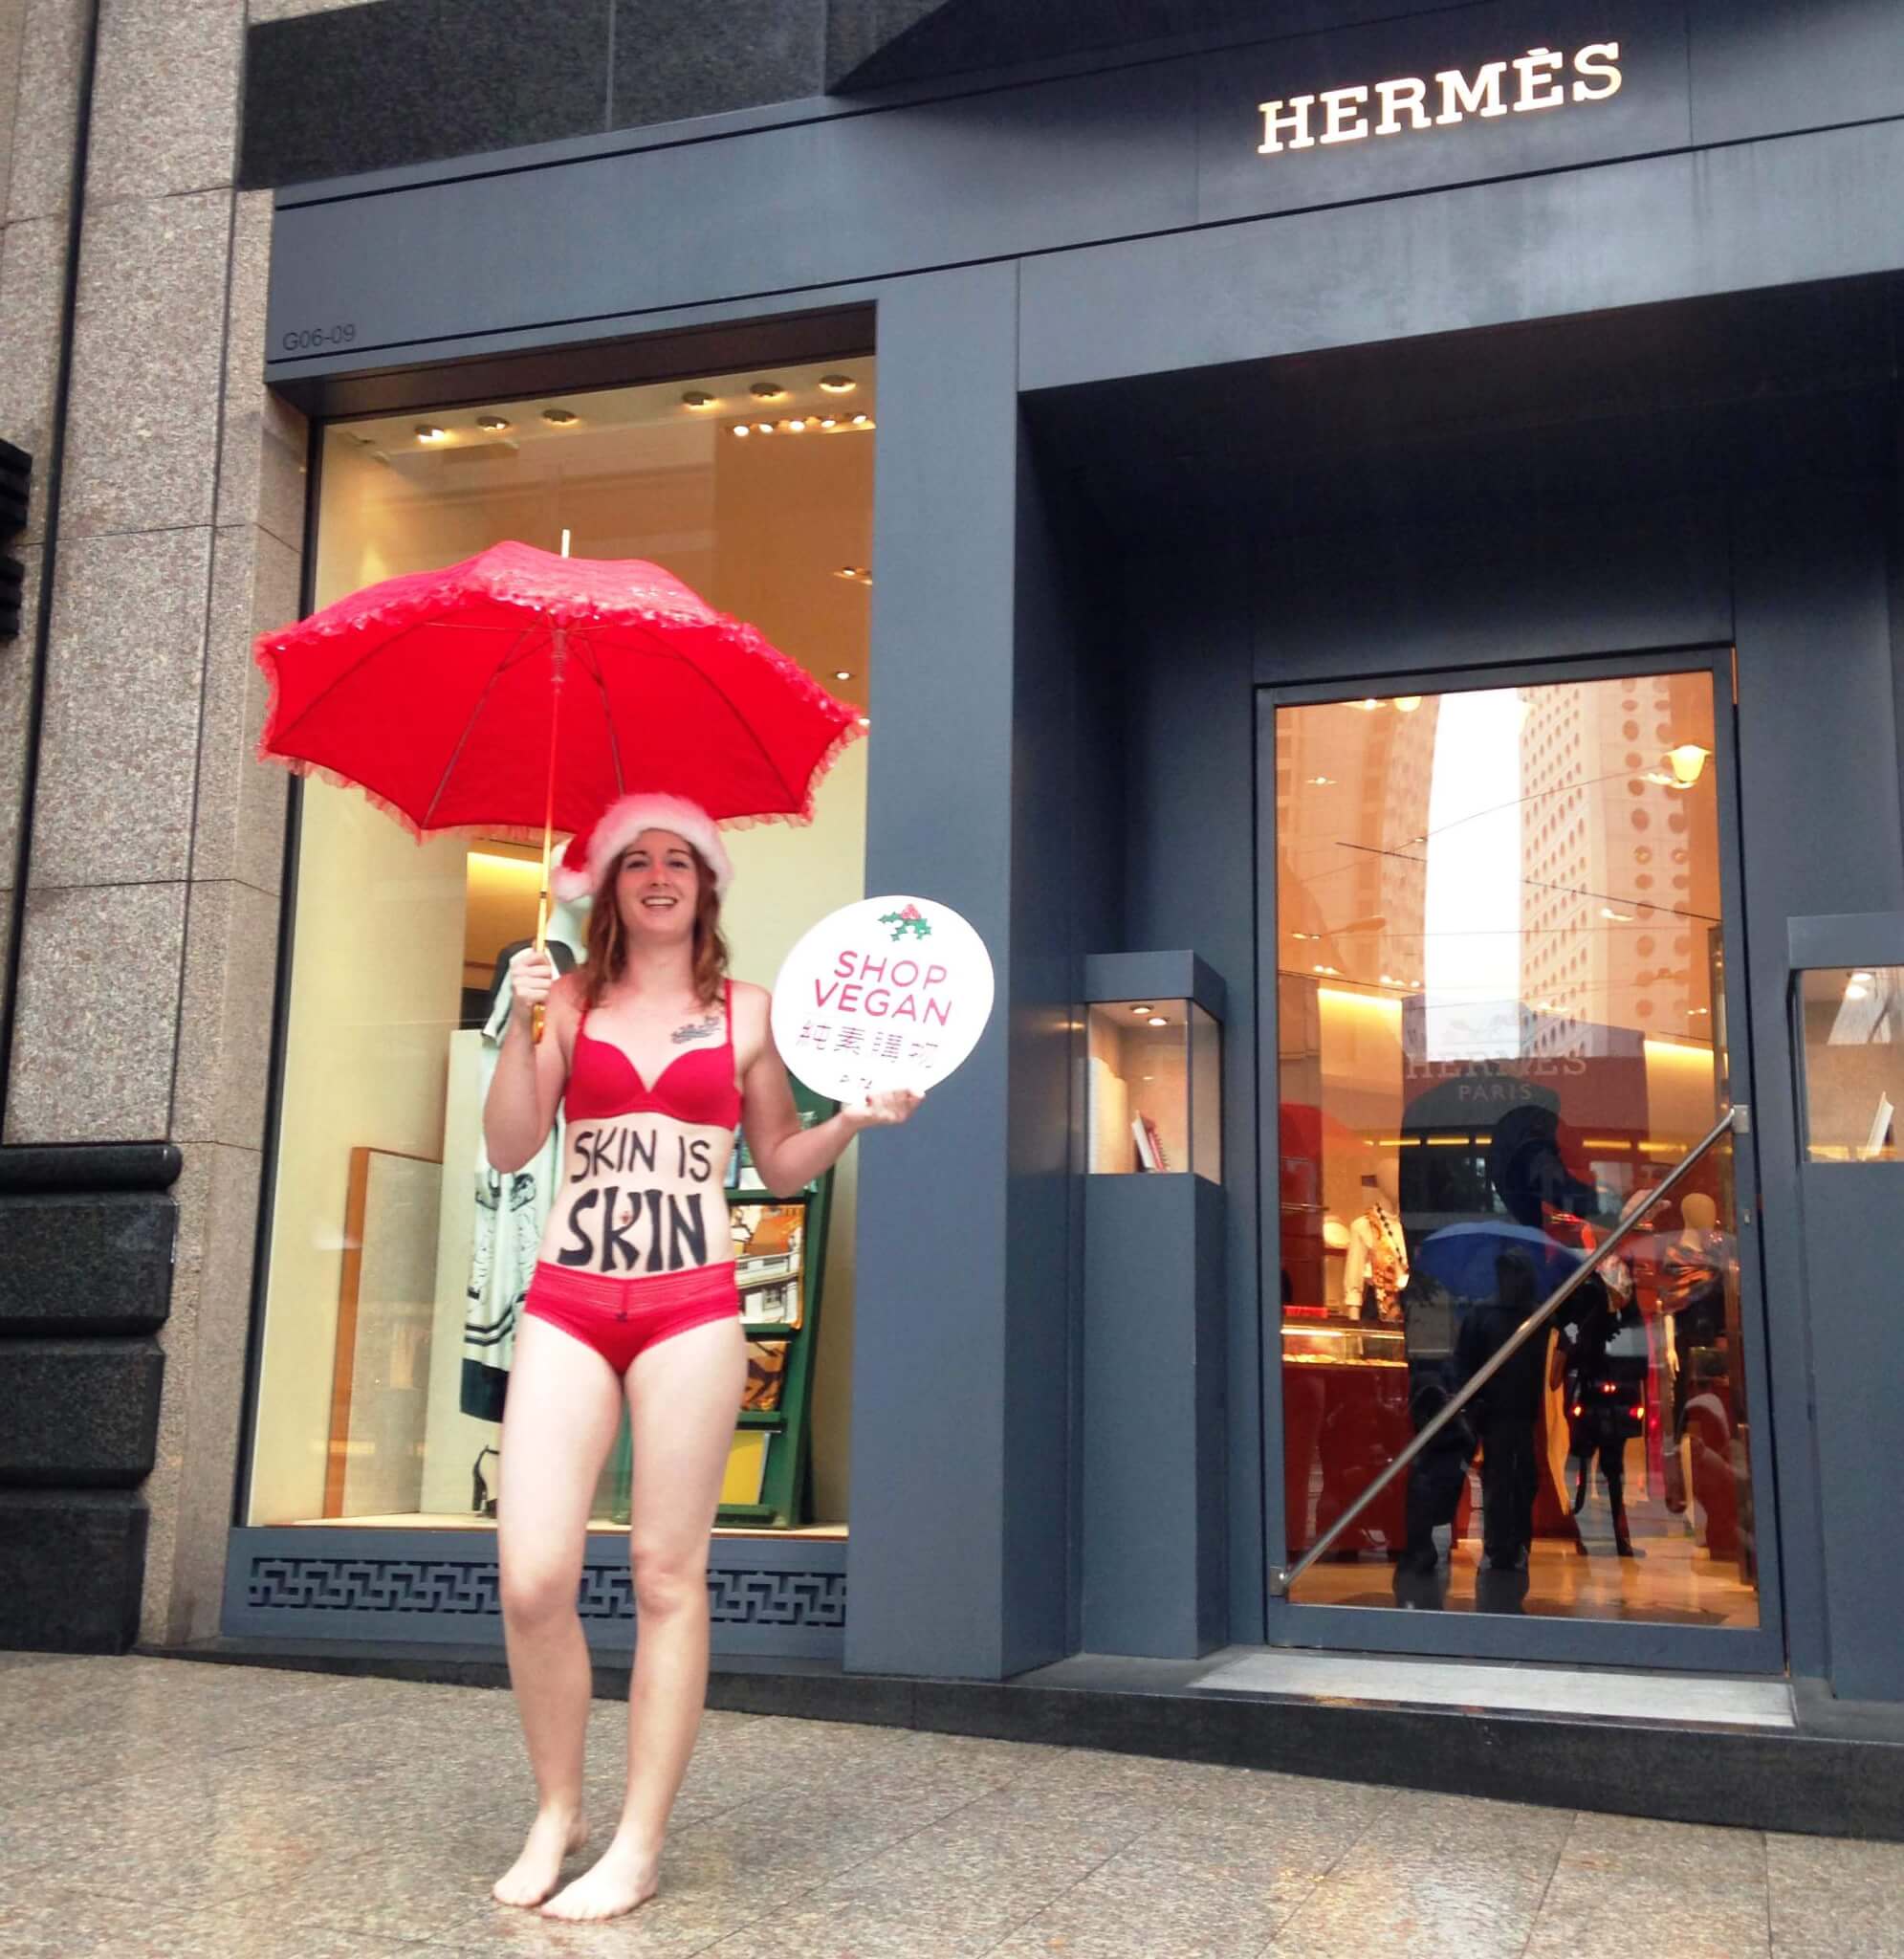 Activist Dresses in Sexy Ho-Ho-Holiday Outfit With ‘Skin Is Skin’ Message